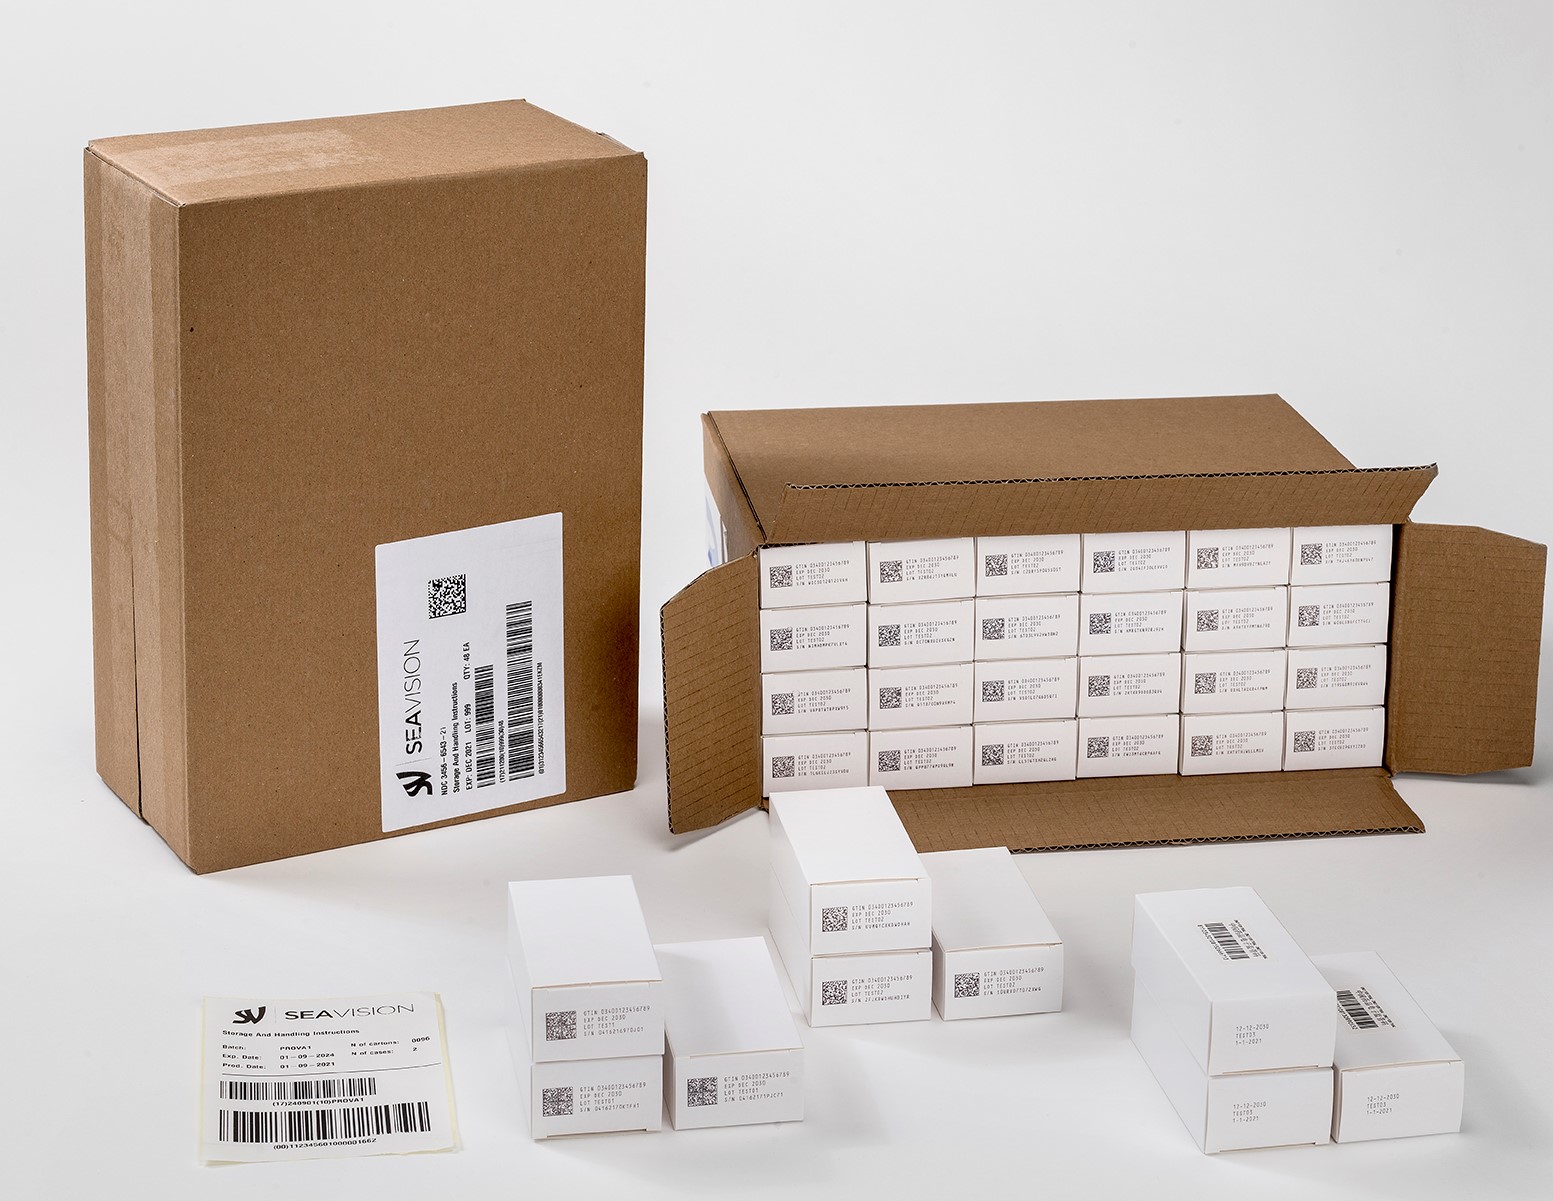 cartons and case serialization and aggregation